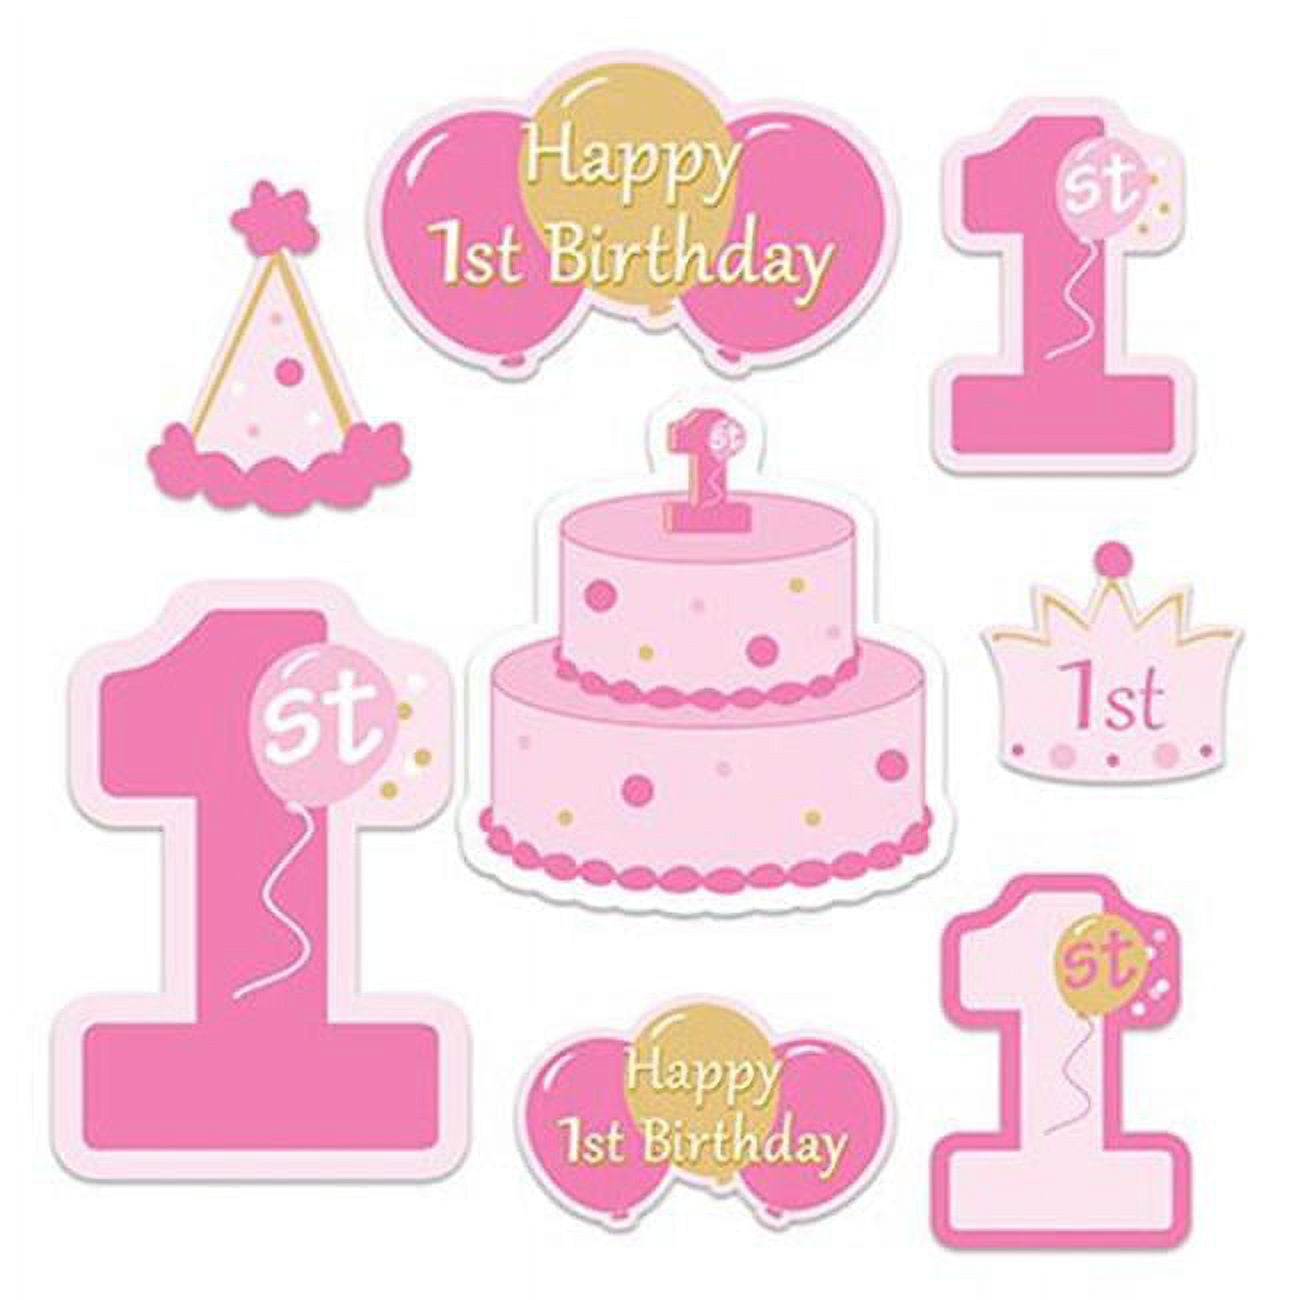 53420-p 7 To 16 In. 1st Birthday Cutouts - Pink, Yellow & White, 8 Per Pack - Pack Of 12